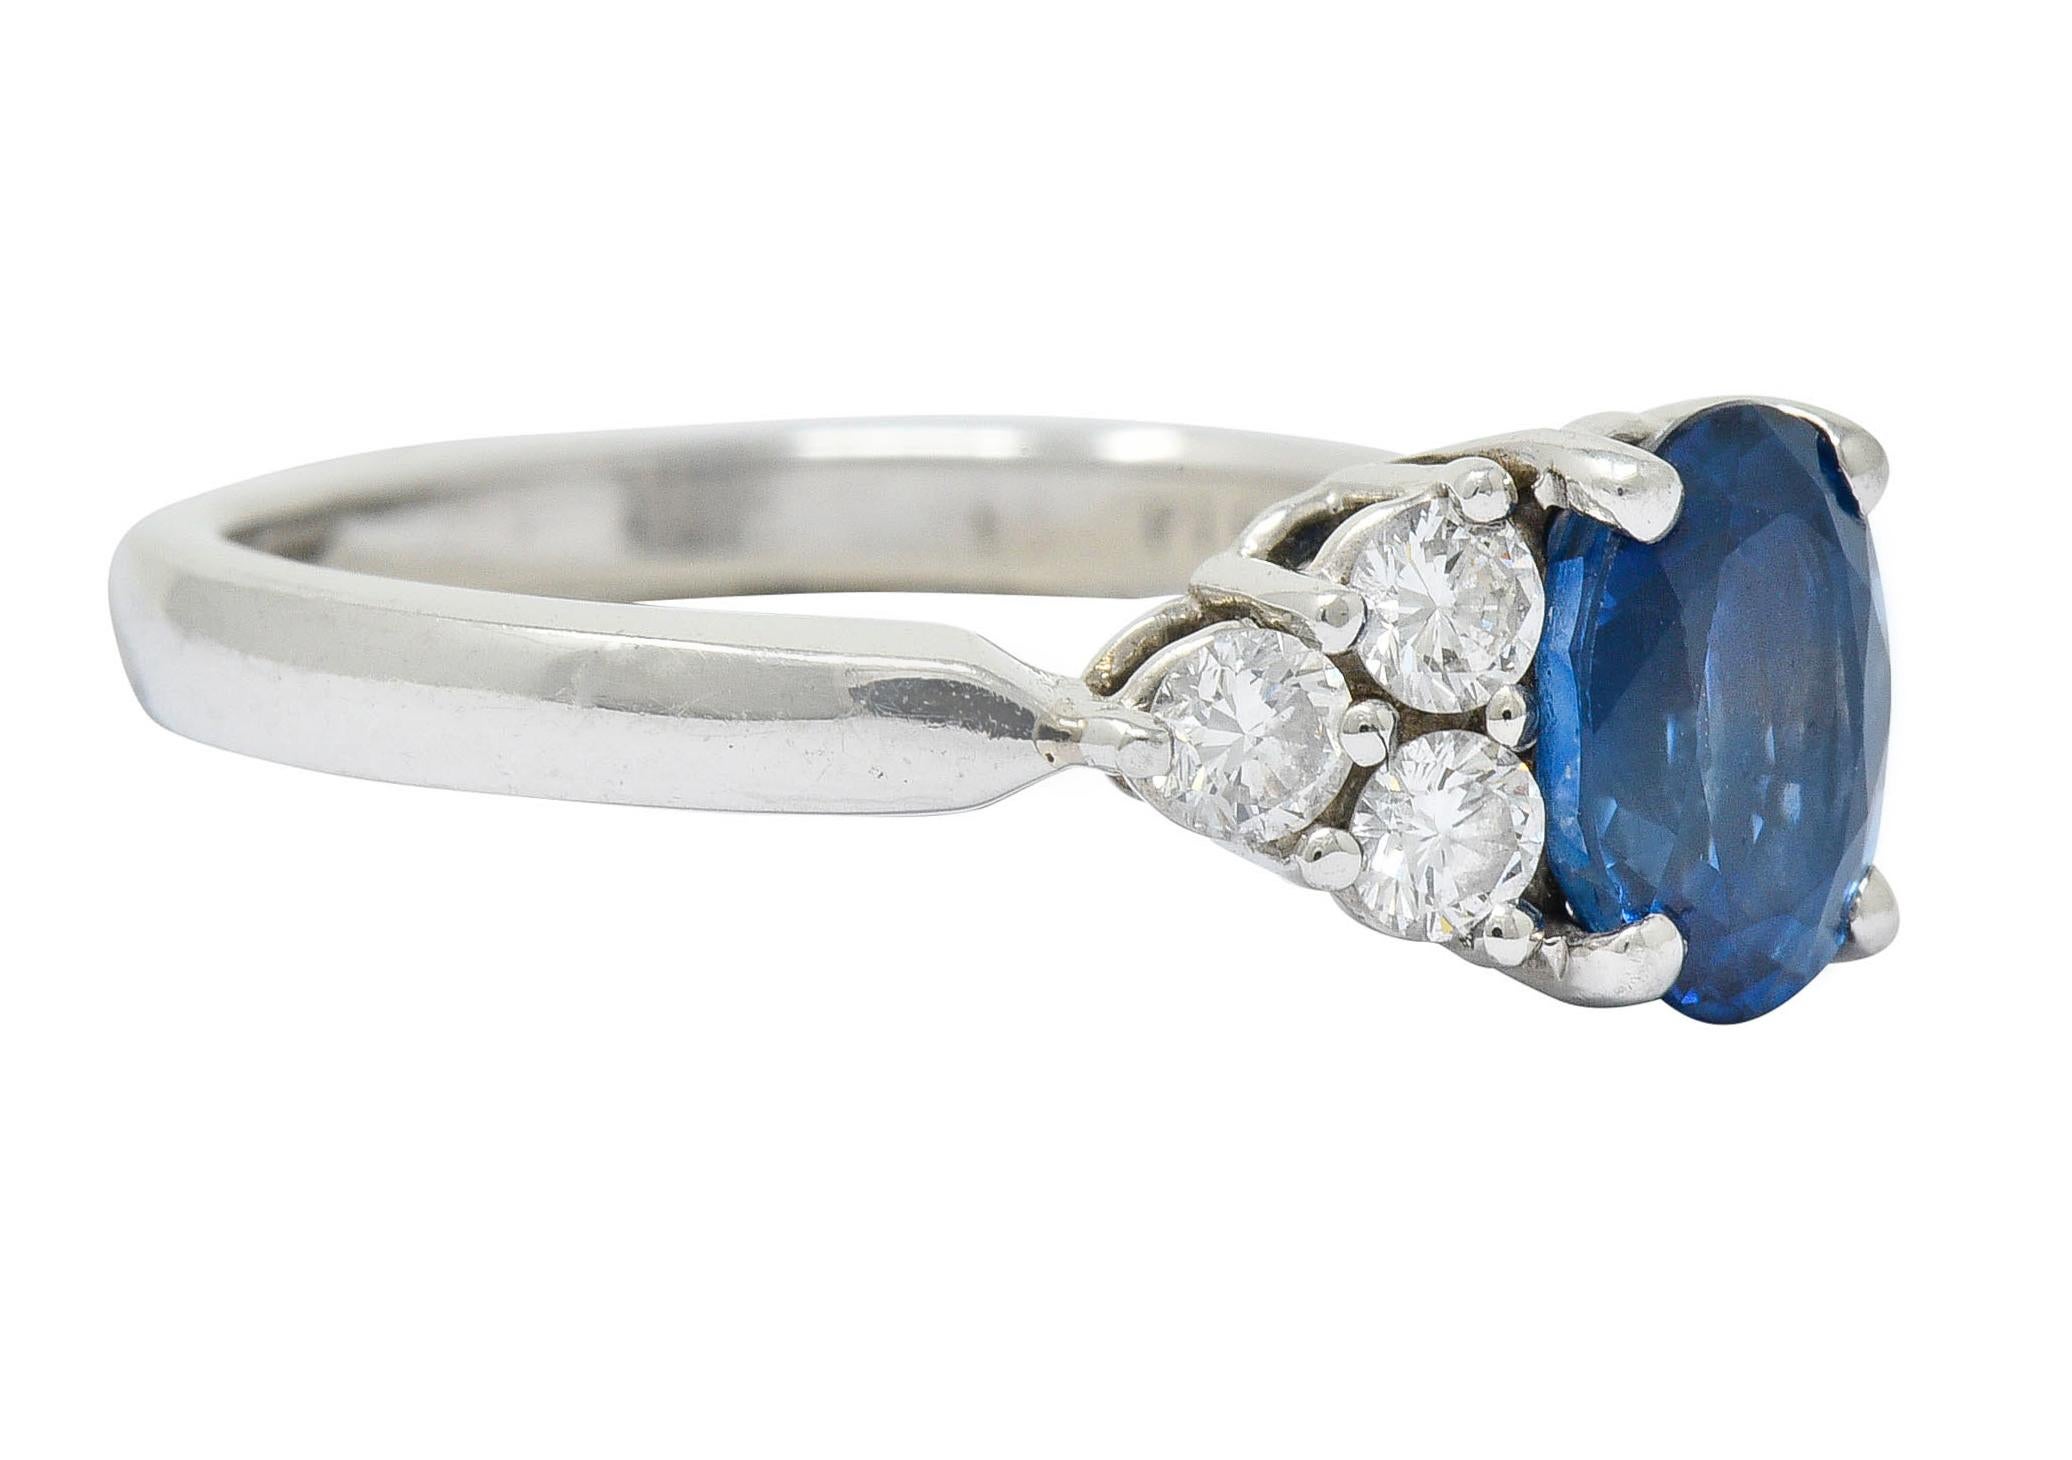 Centering an oval cut sapphire weighing approximately 1.16 carats

Transparent with enticing medium-light denim blue color

Flanked by triads of round brilliant cut diamonds at shoulders

Weighing in total approximately 0.35 carat with G/H color and